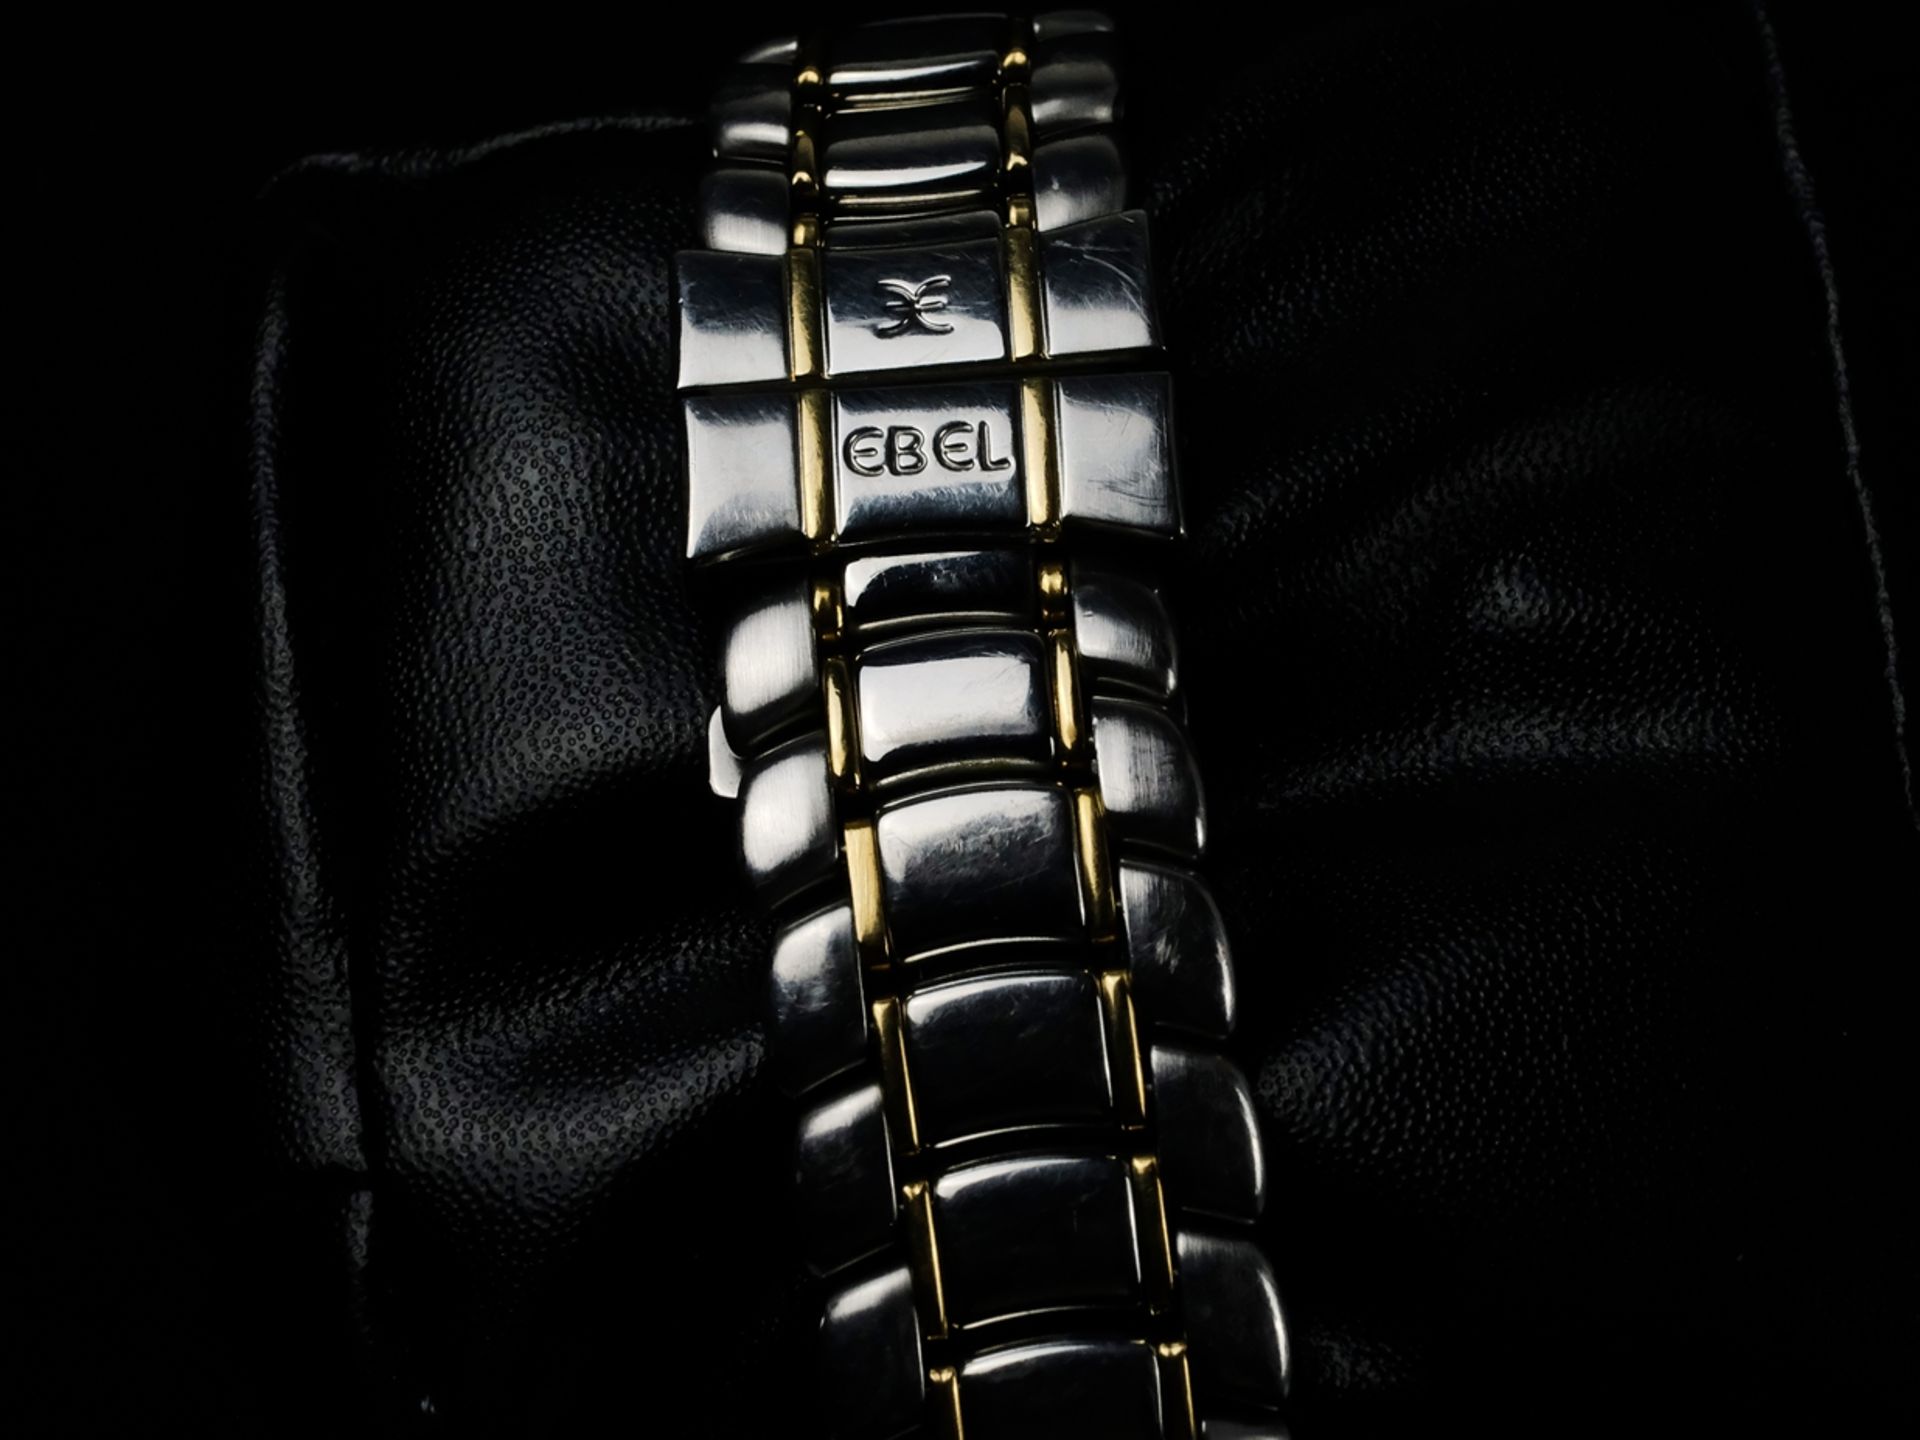 EBEL WATCH "Discovery", black dial with white Arabic numerals, white geometric hands, D 4cm, quartz - Image 4 of 7